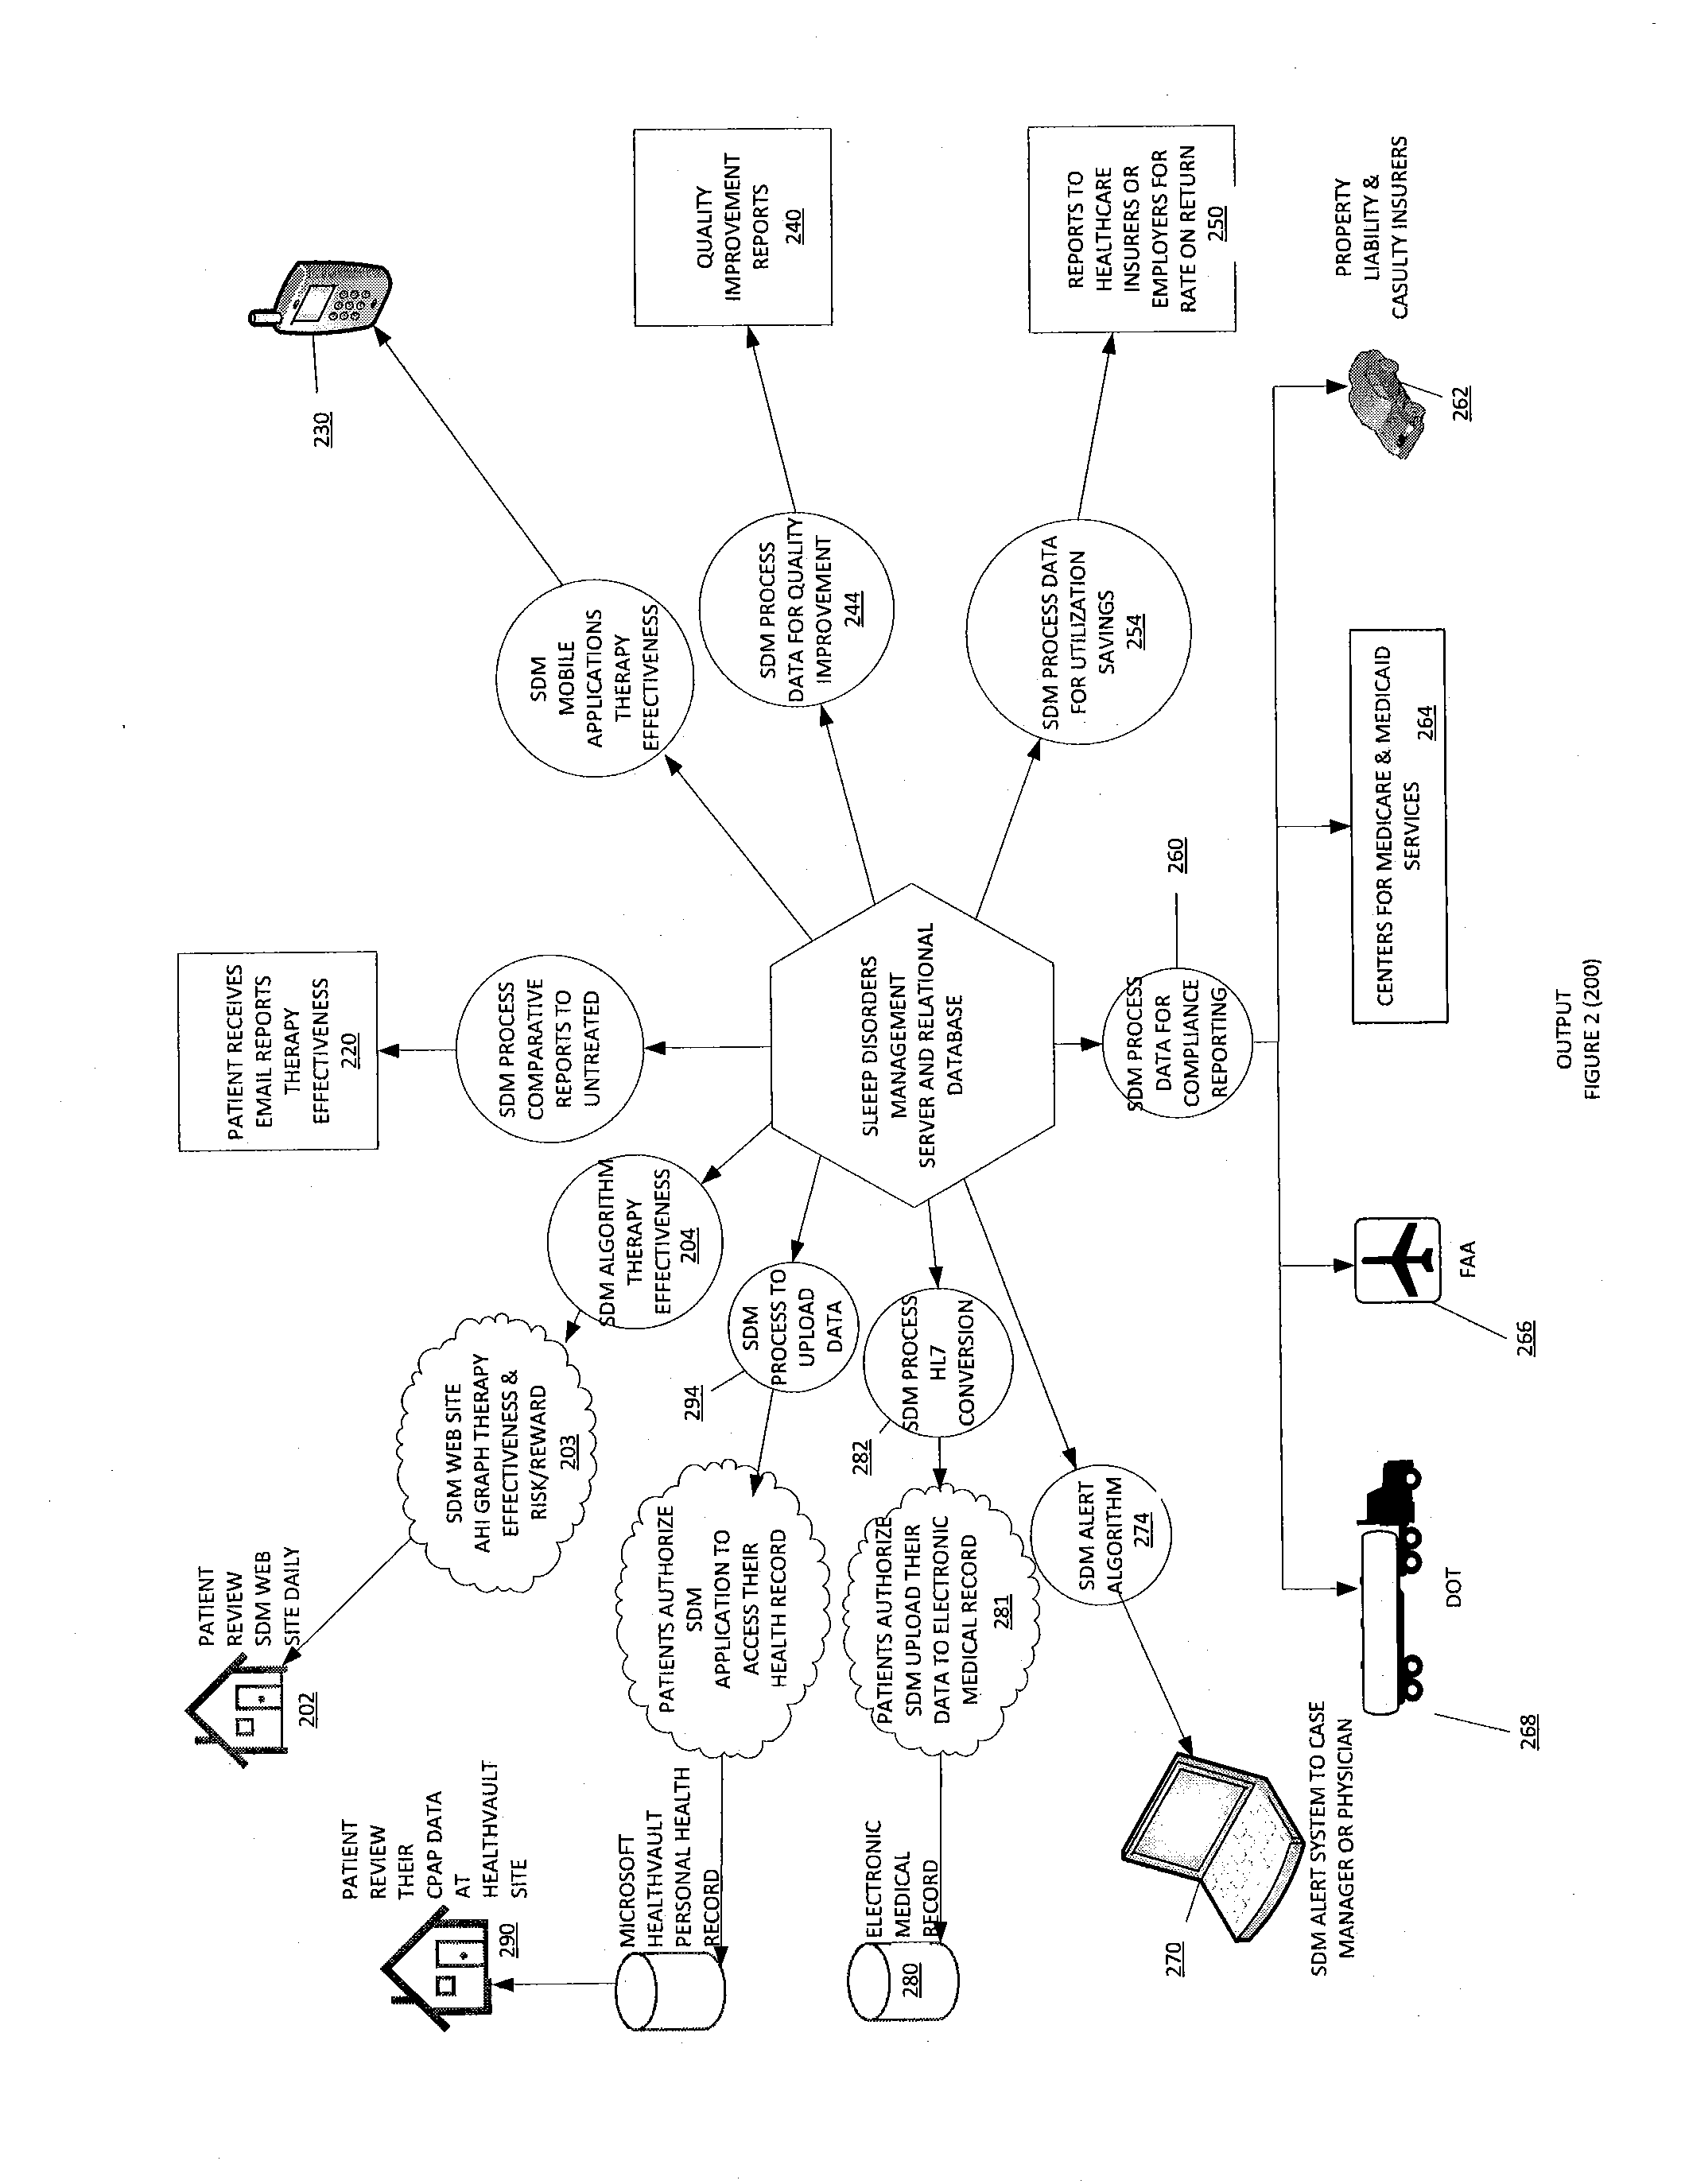 Systems and Methods for Diagnosing and Treating Sleep Disorders